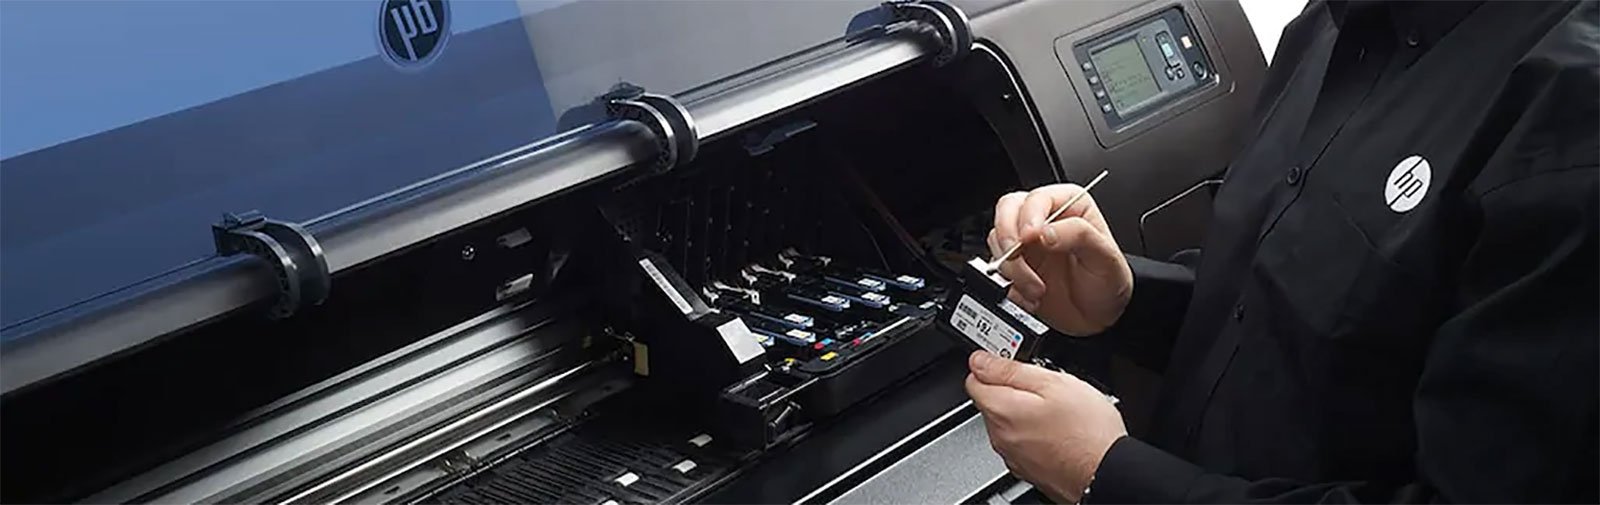 Regularly replace your printer's consumables, such as ink cartridges and toner, to maintain print quality and prevent damage to the machine.
Perform routine maintenance tasks, such as cleaning the print heads and aligning the cartridges, to keep your printer running smoothly.